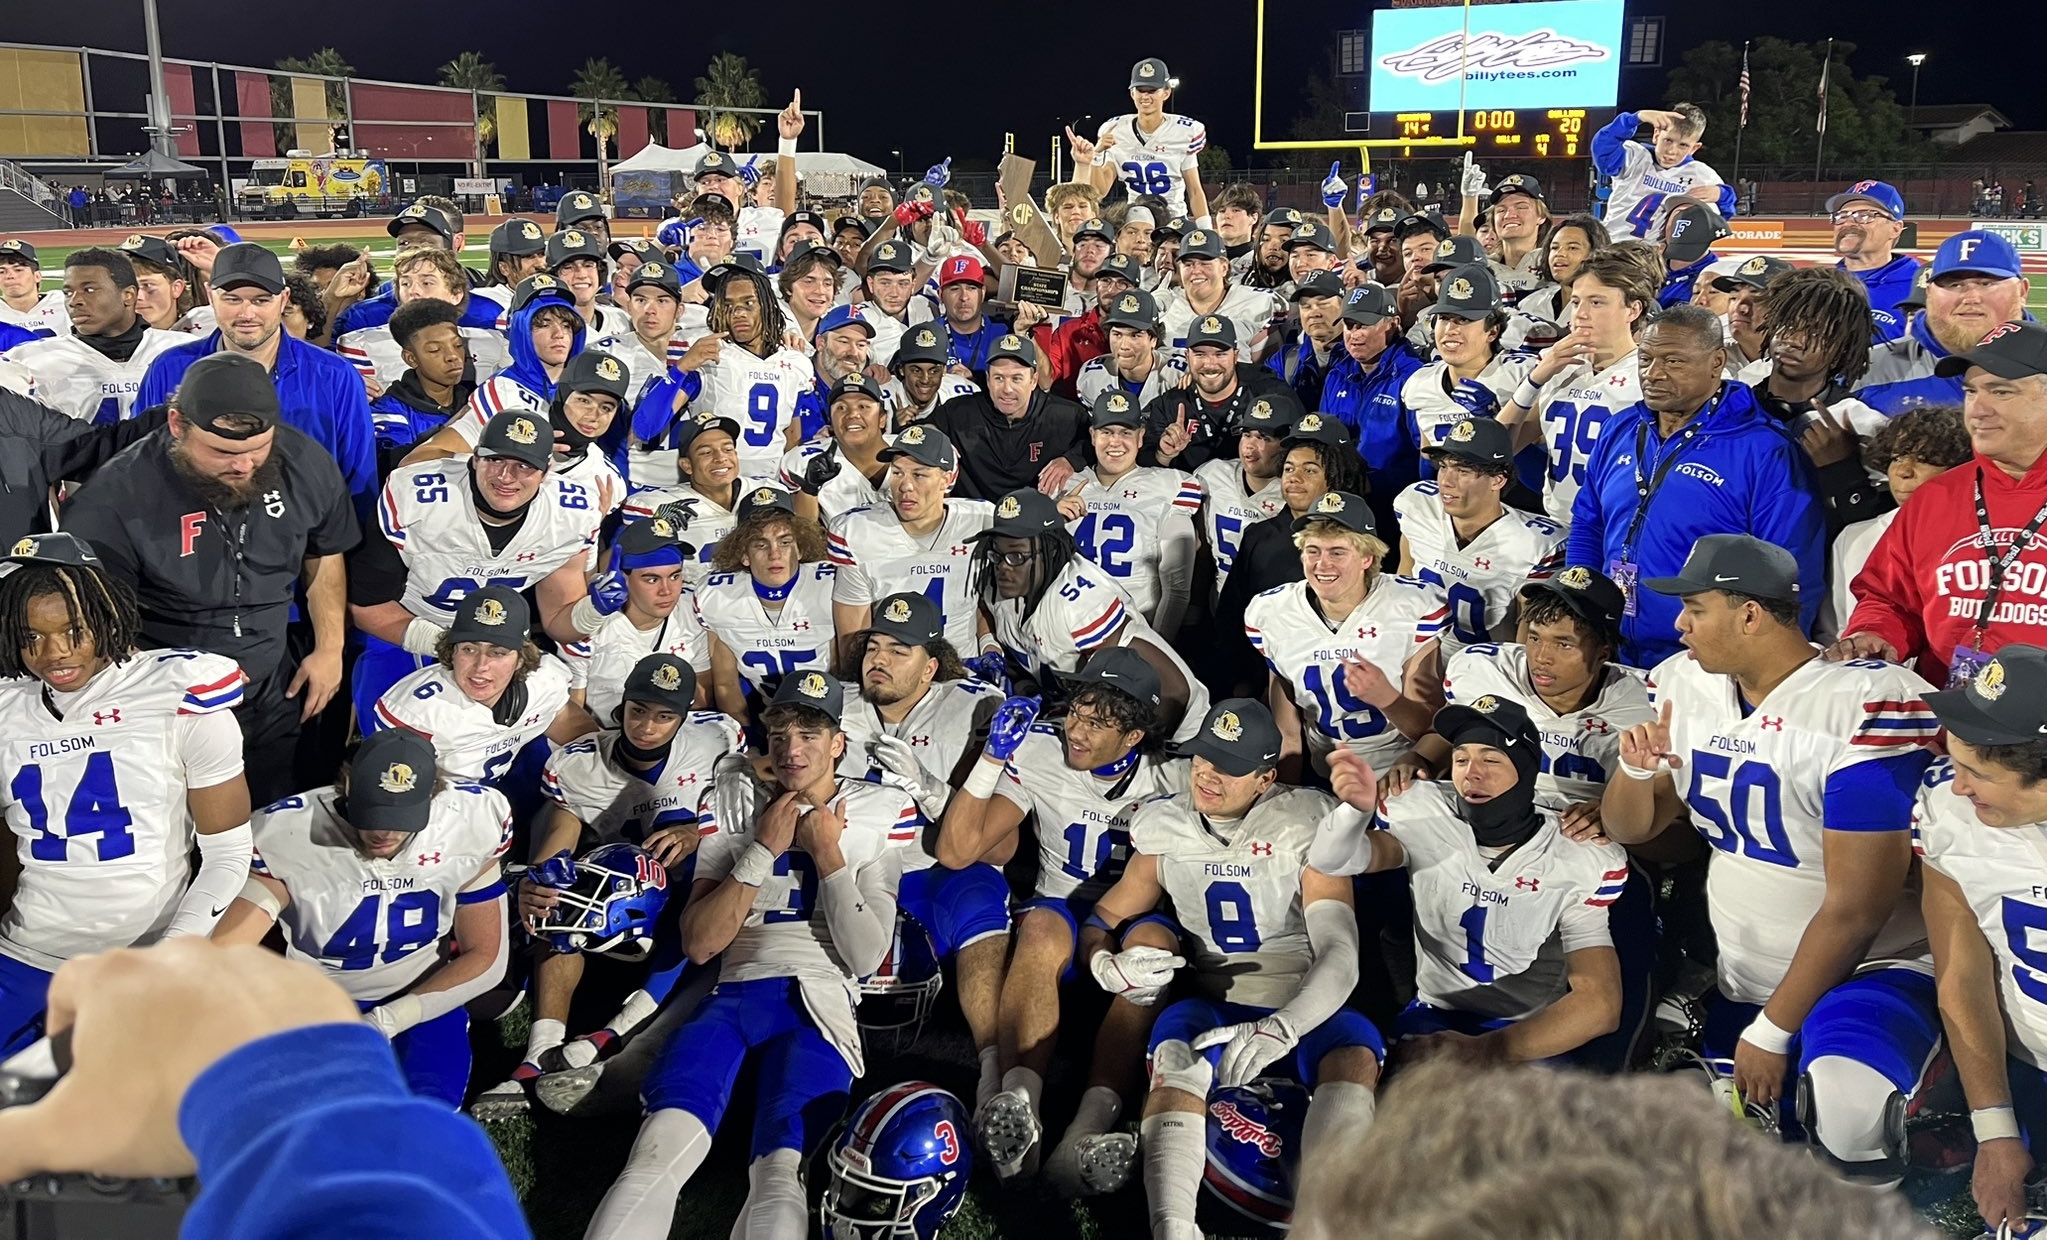 Folsom Bulldogs celebrate 5th state title in Historic Folsom Wednesday